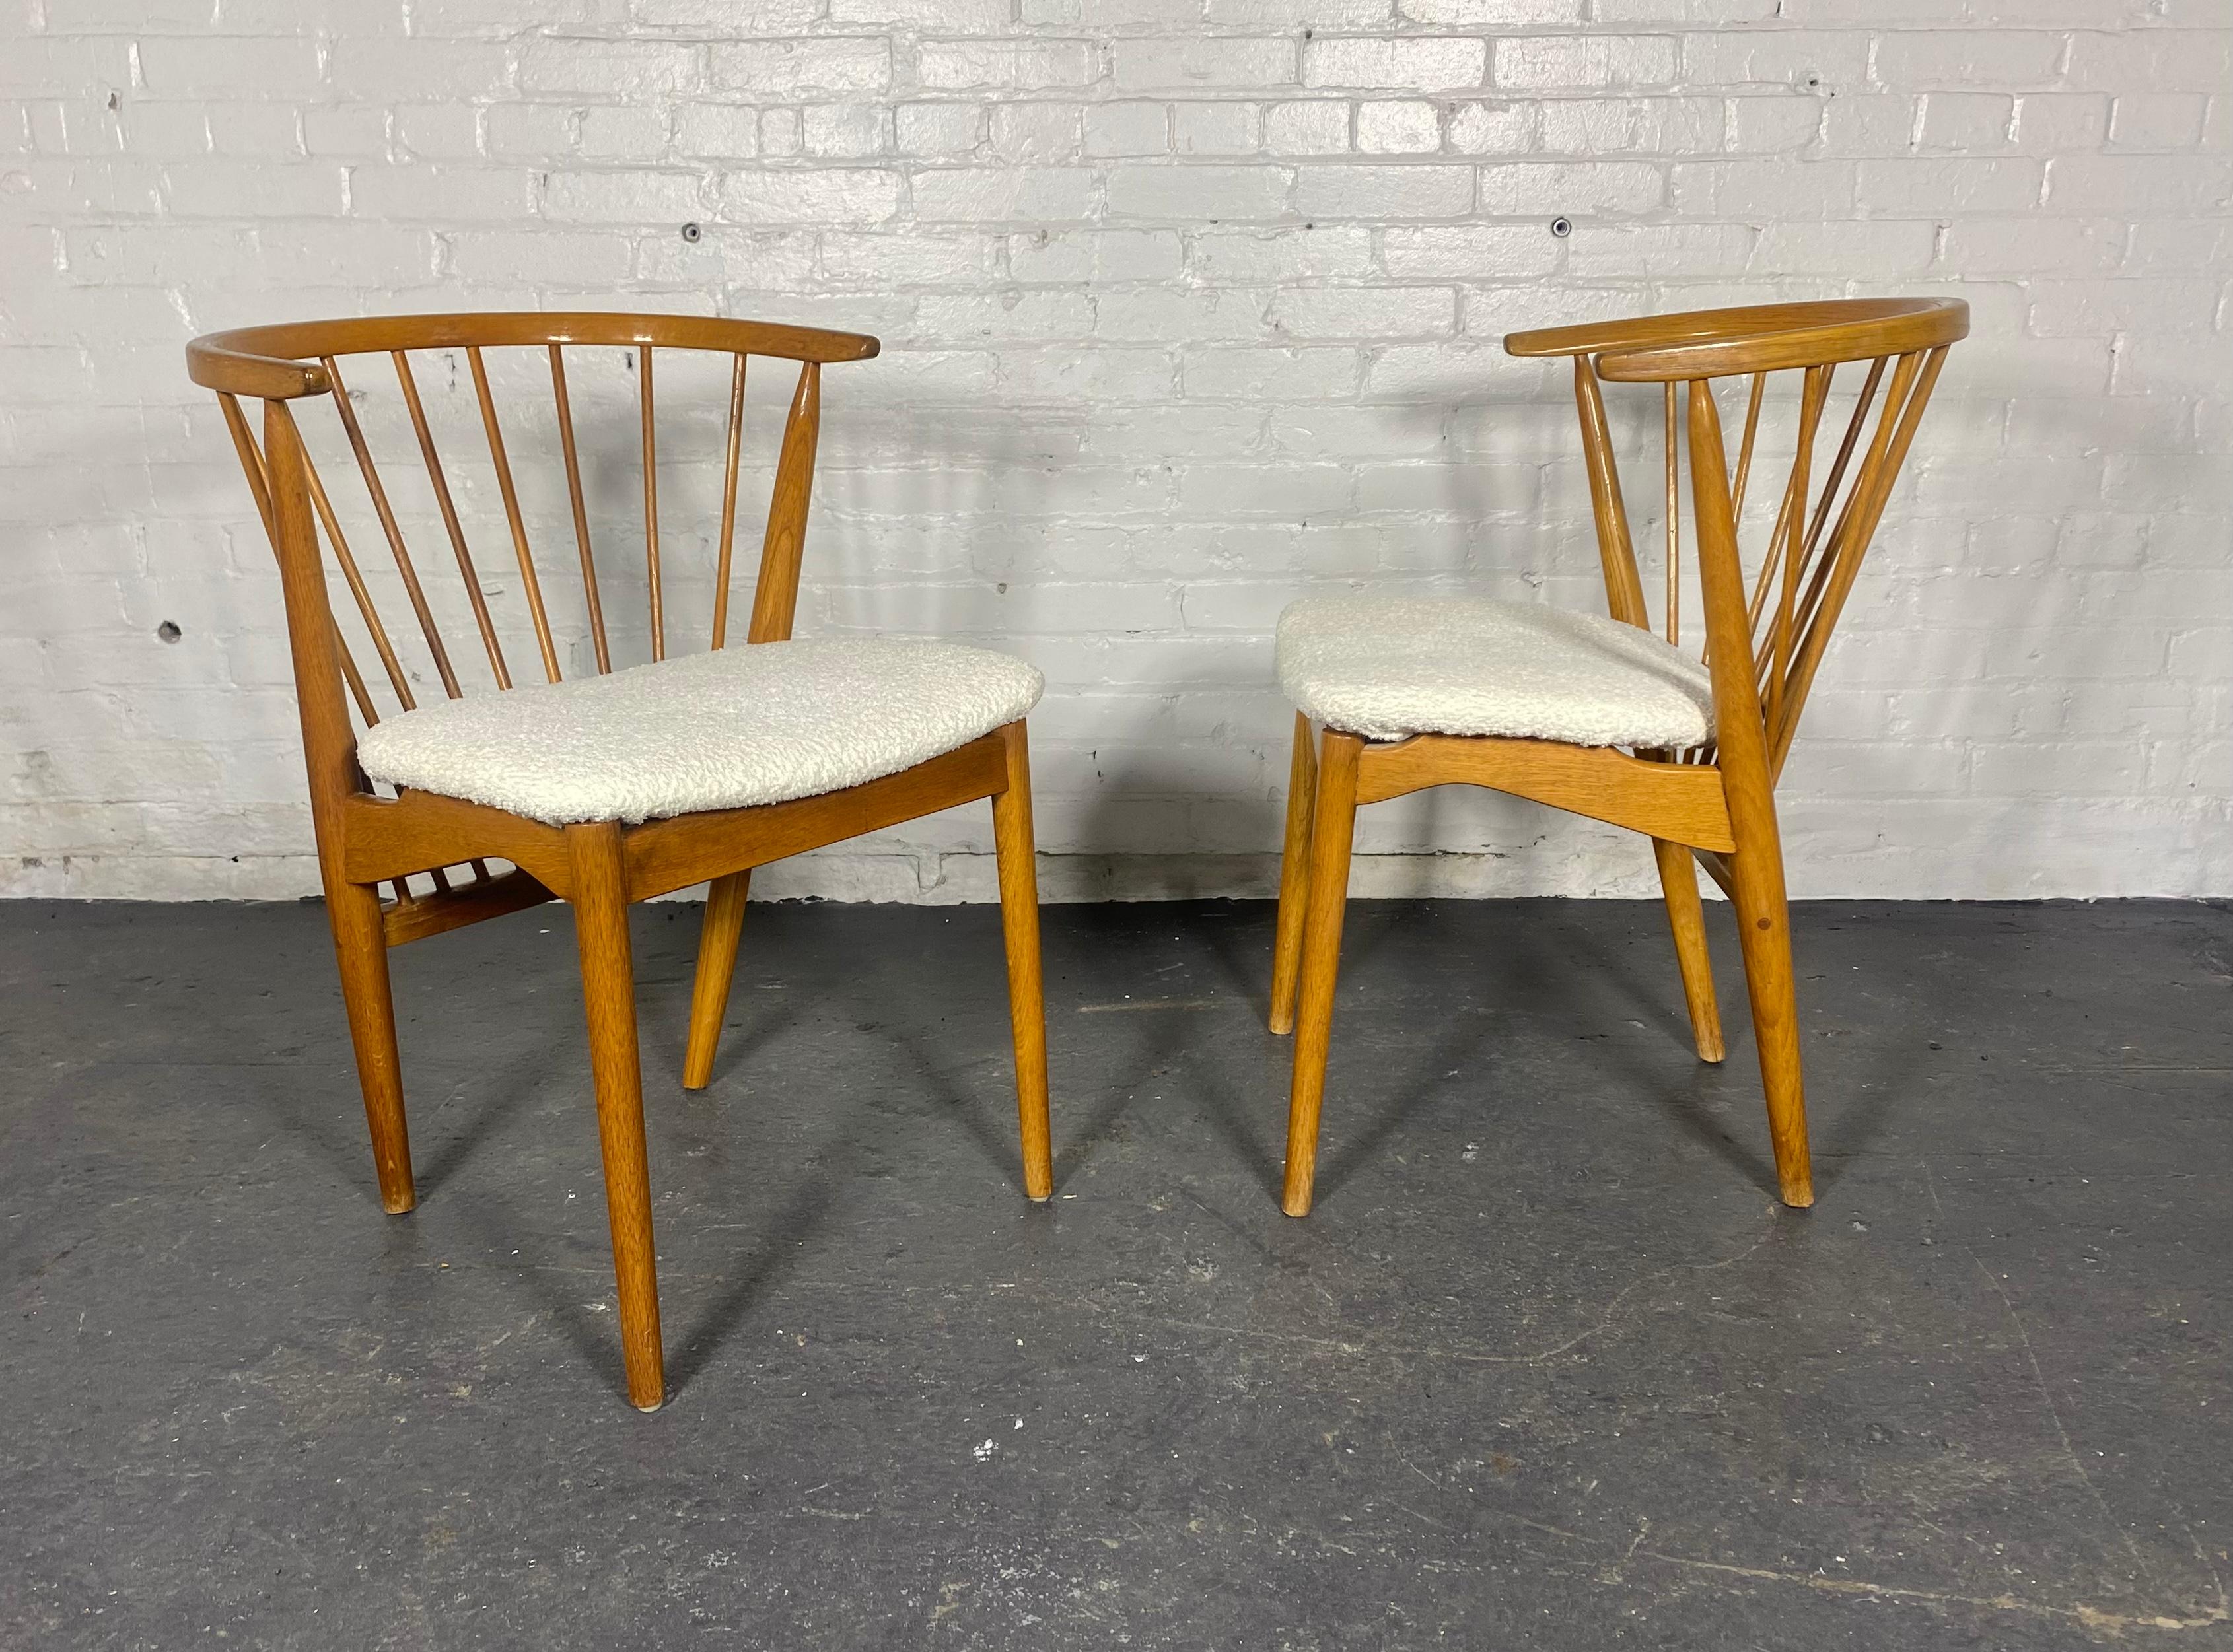 Pair cLASSIC Danish Spindle Barrel Back Arm Chairs by George Tanier / Denmark For Sale 5